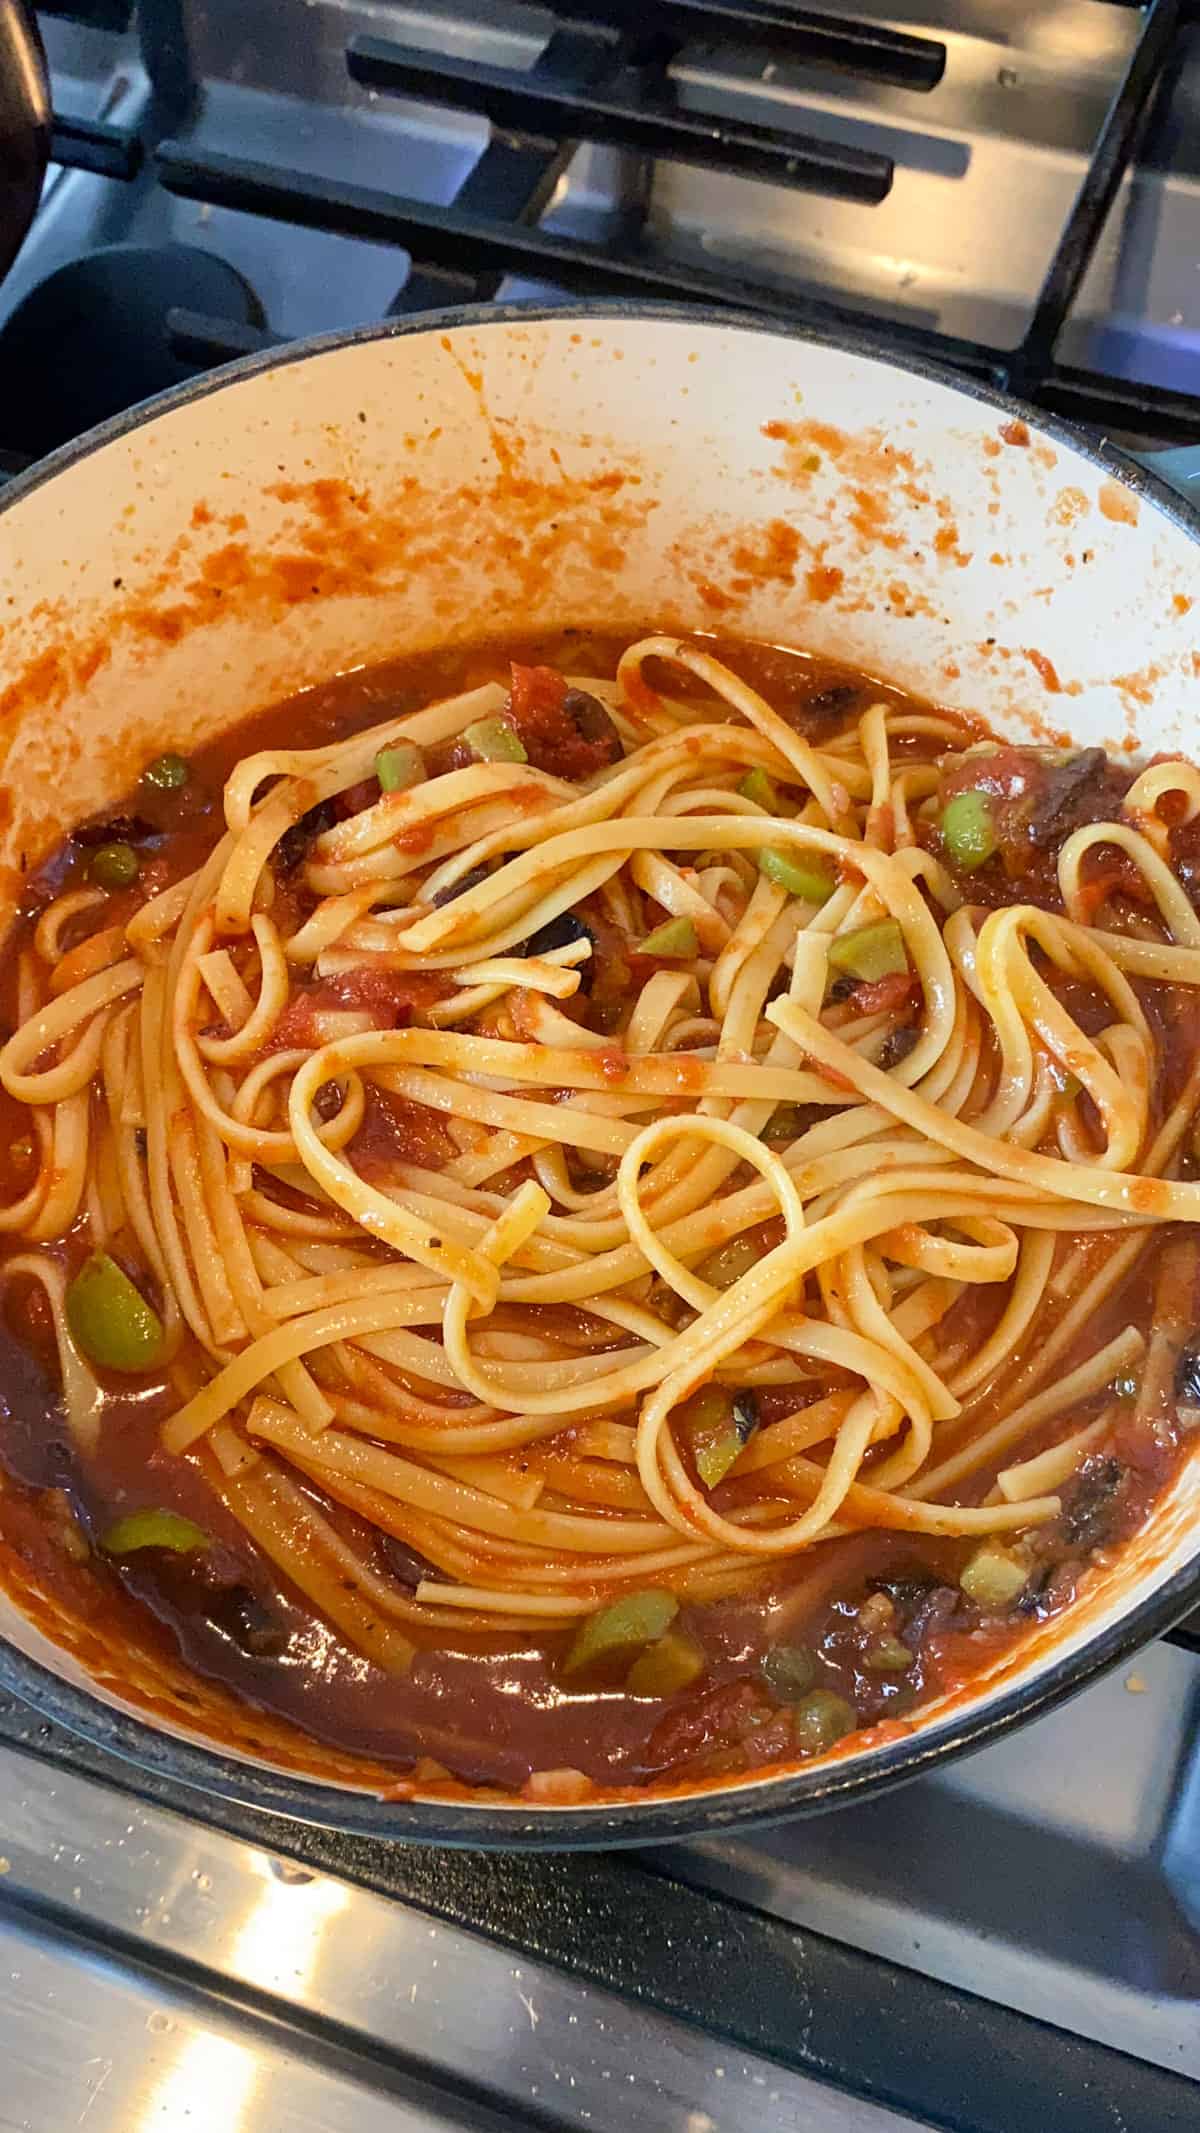 Toss the cooked pasta with the puttanesca sauce so all of the sauce evenly coats the noodles.